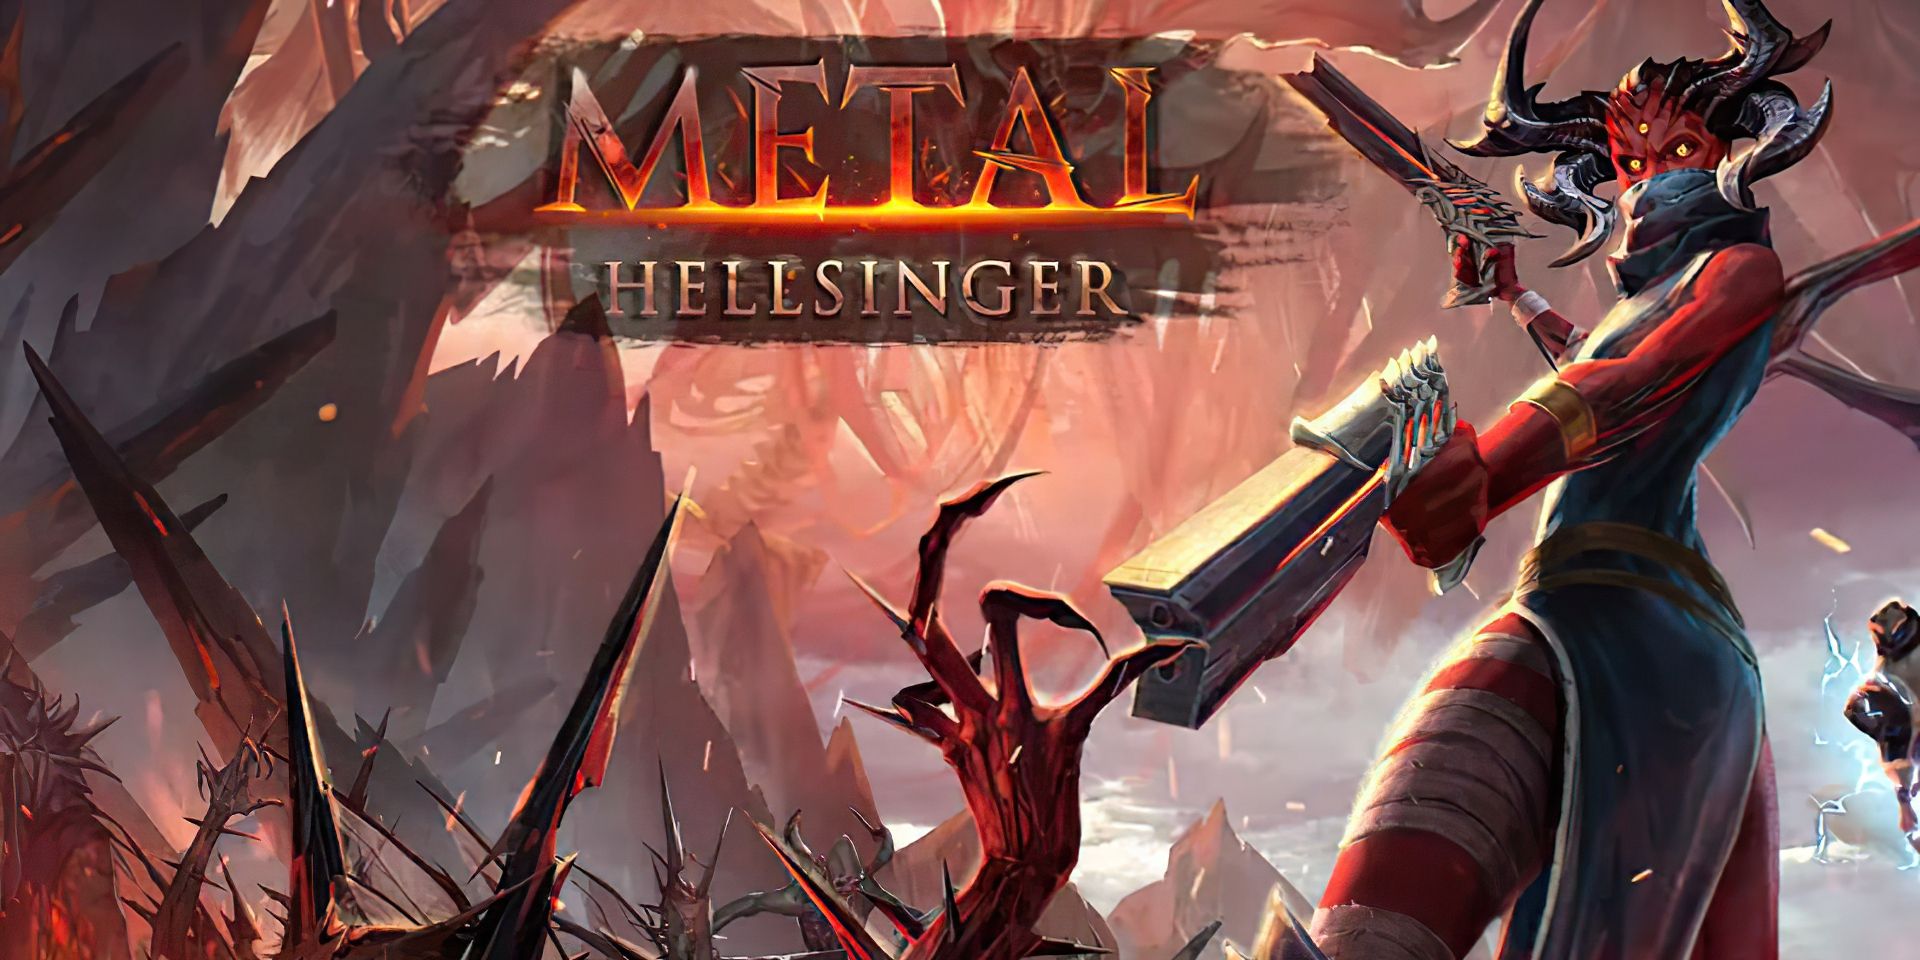 Metal: Hellsinger on X: Hellsingers, we're celebrating 1 year of  headbanging goodness with our 1 Year Anniversary Steam Sale! Grab Metal:  Hellsinger and DLCs for up to 55% off. This is one